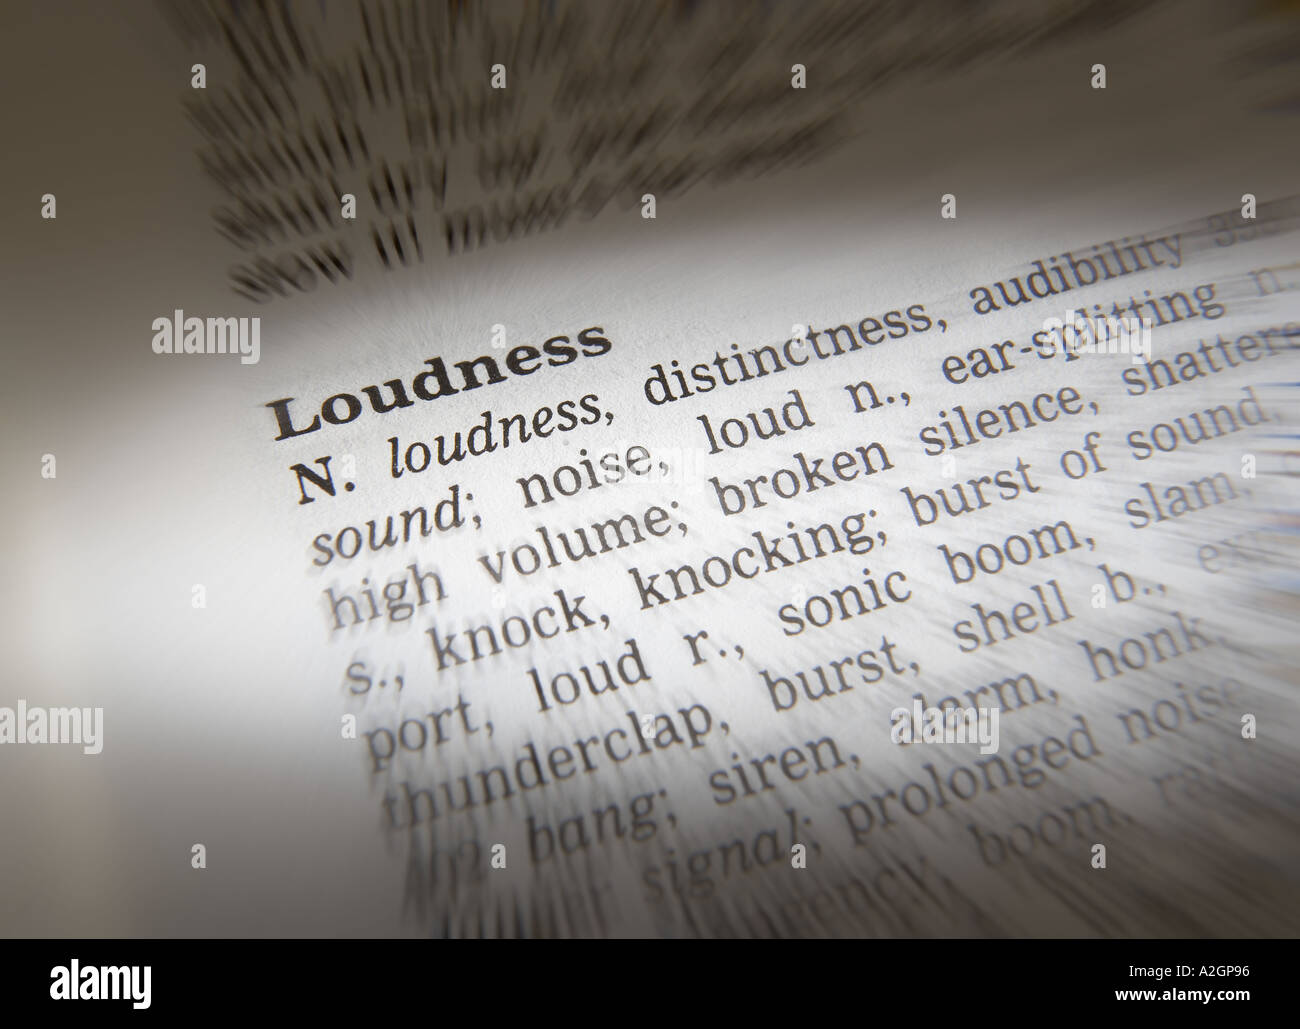 THESAURUS PAGE SHOWING DEFINITION OF WORD LOUDNESS Stock Photo